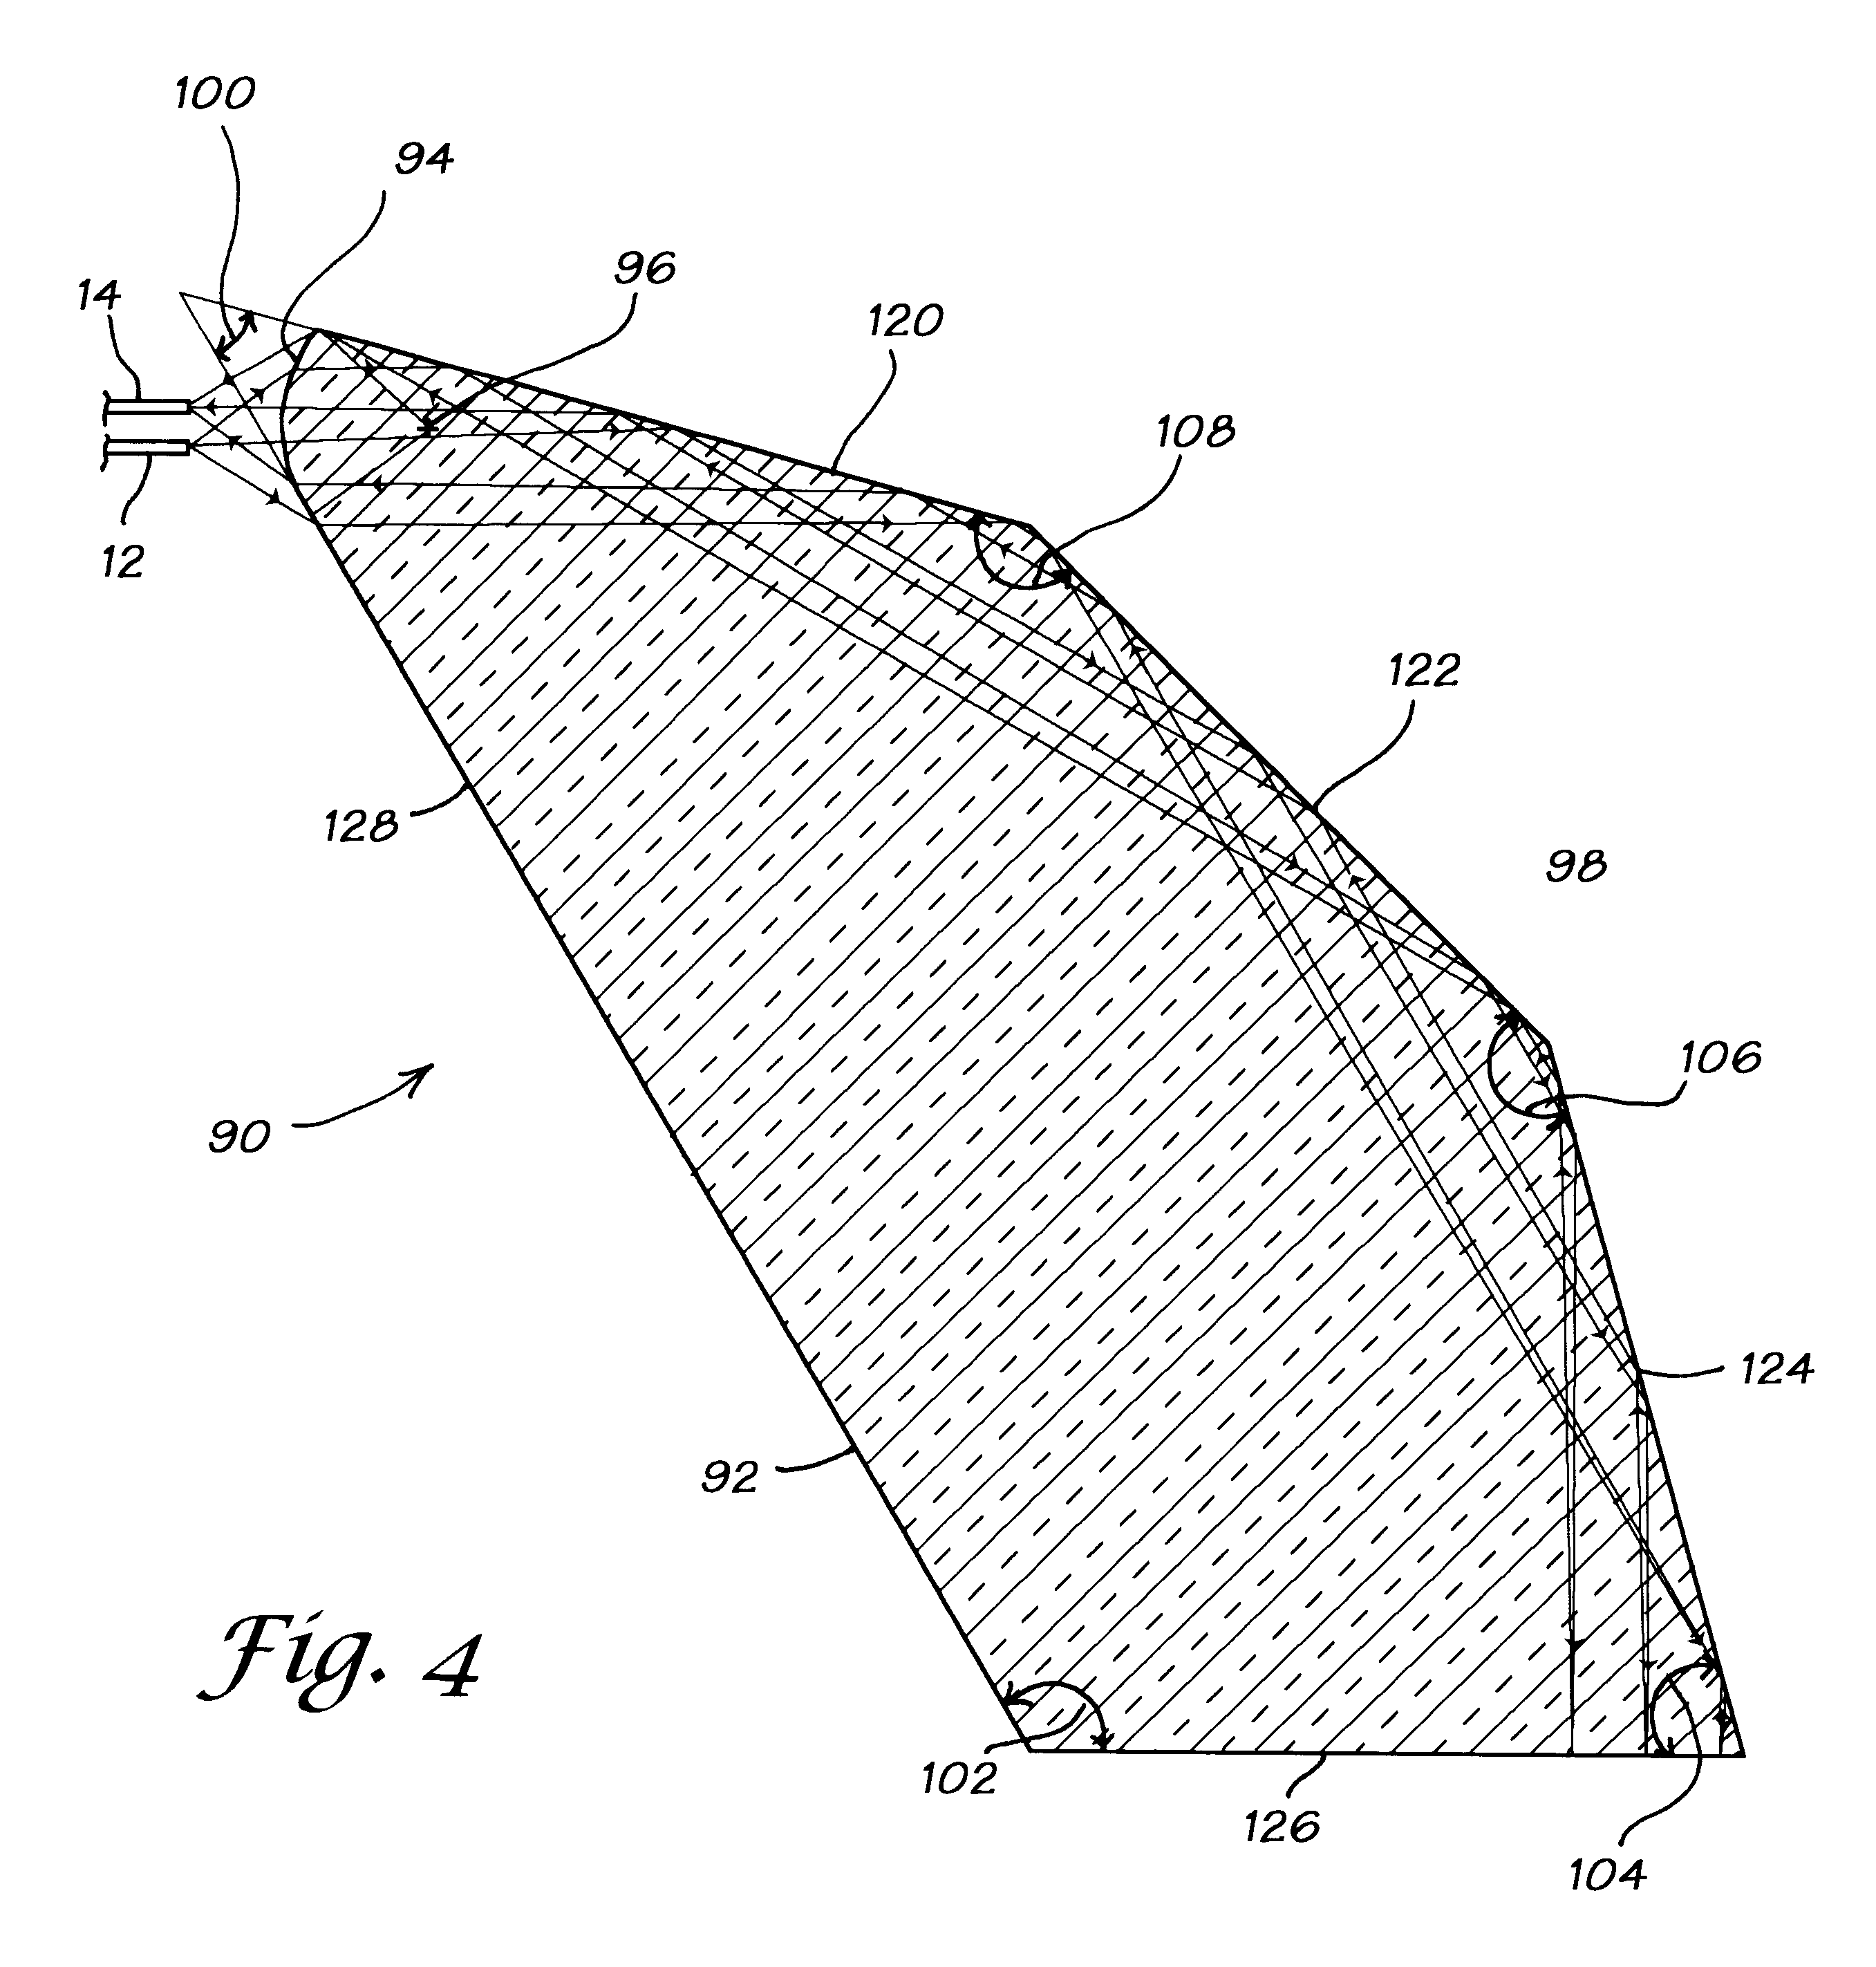 Fiber optic probe for attenuated total internal reflection spectrophotometry